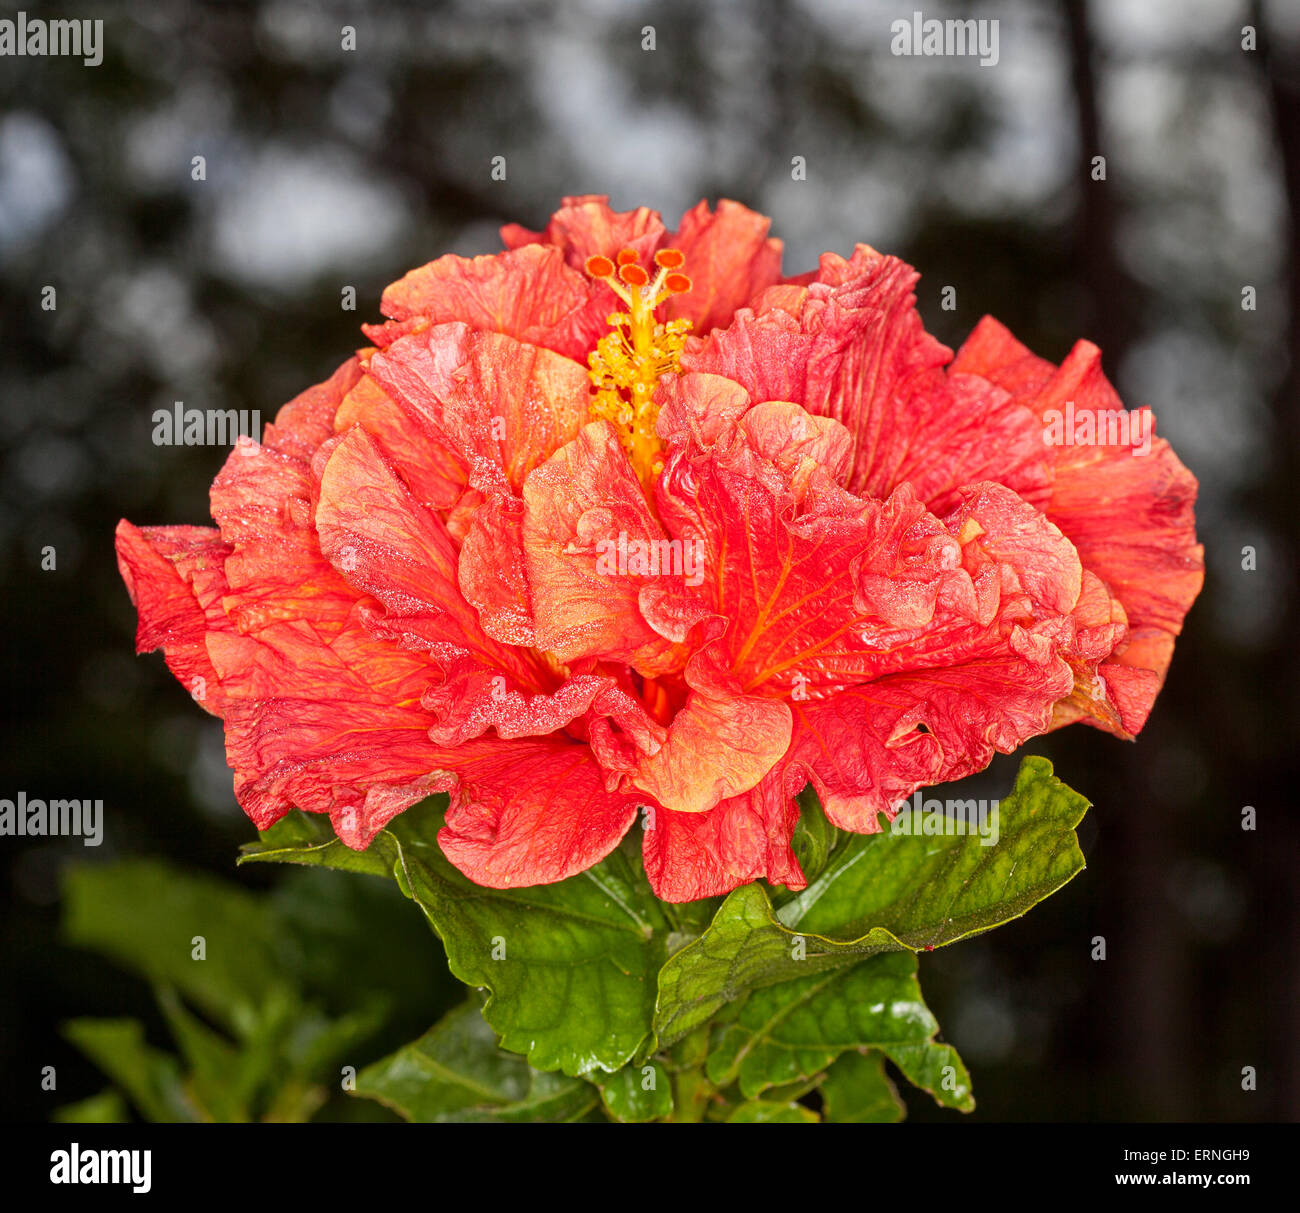 Large vivid orange / red double flower of hibiscus, Hawaiian hybrid Rainbow Fire with emerald green leaves on dark background Stock Photo